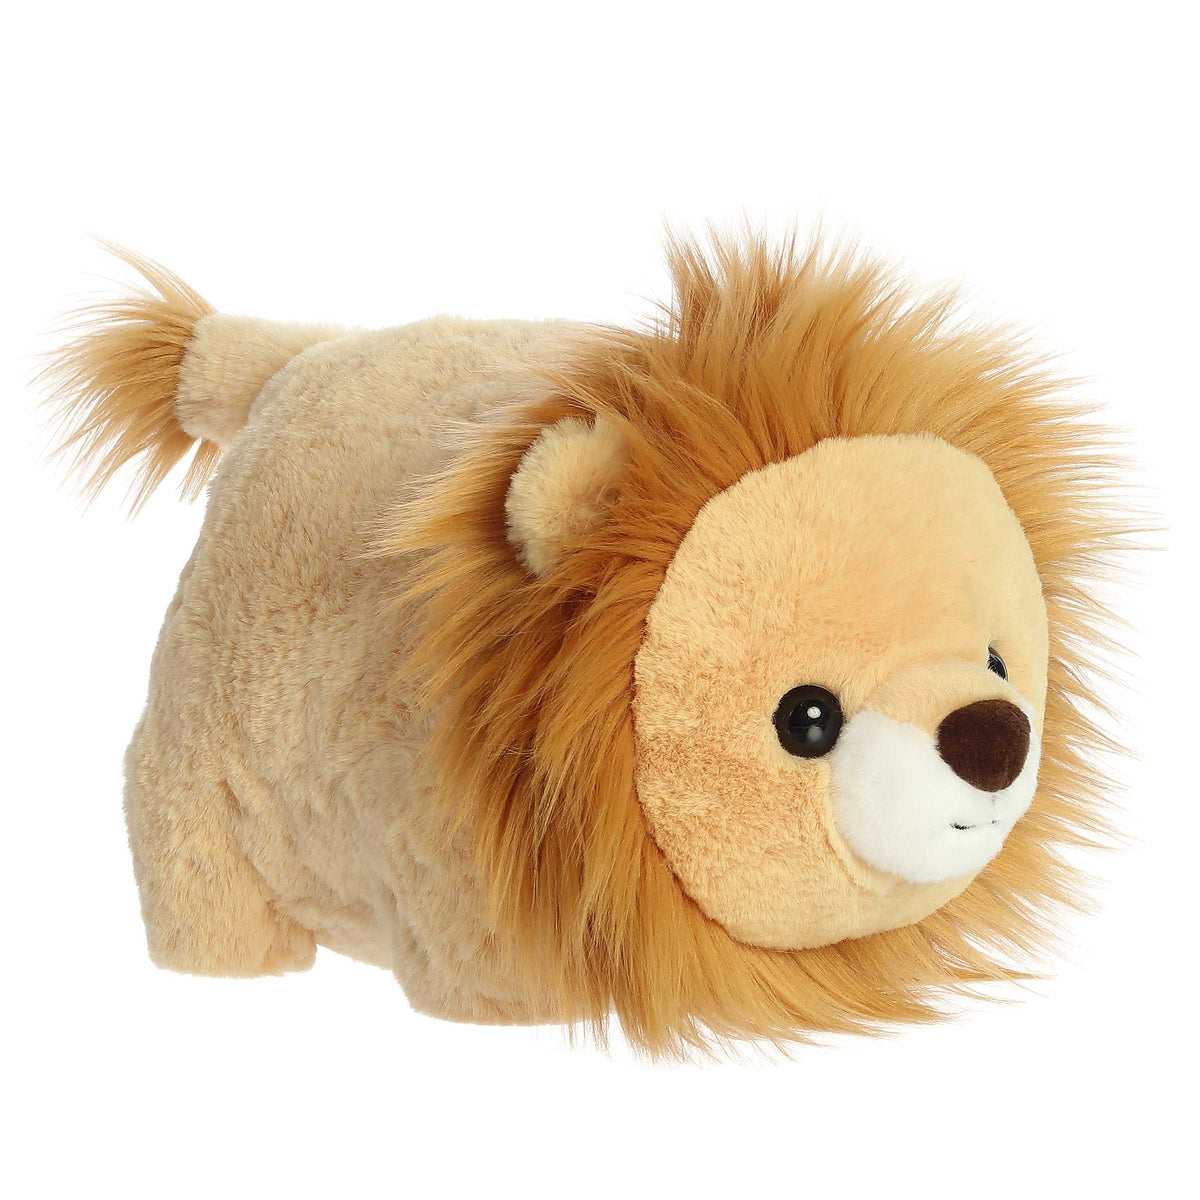 Logan Lion from Spudsters, a potato-shaped lion with a luscious golden mane, perfect for superior cuddles